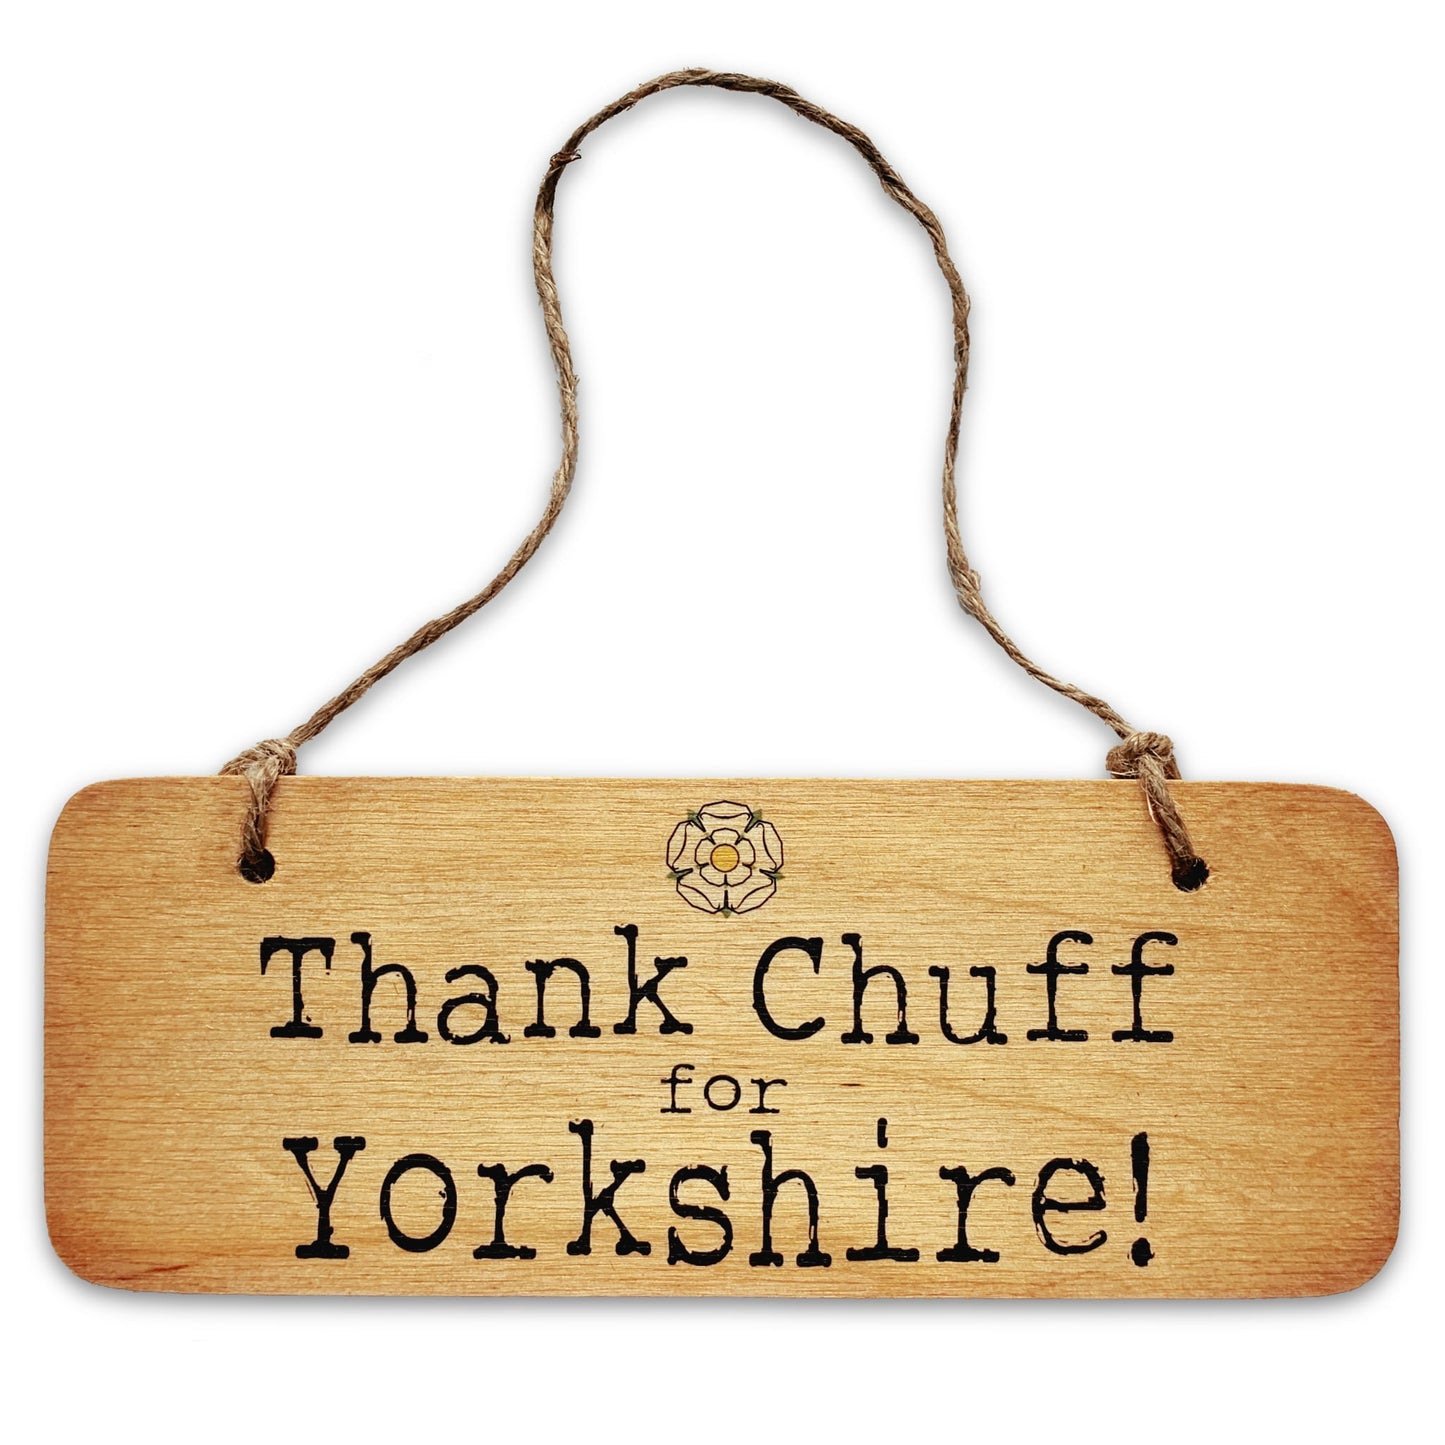 Thank Chuff for Yorkshire Rustic Wooden Sign - The Great Yorkshire Shop